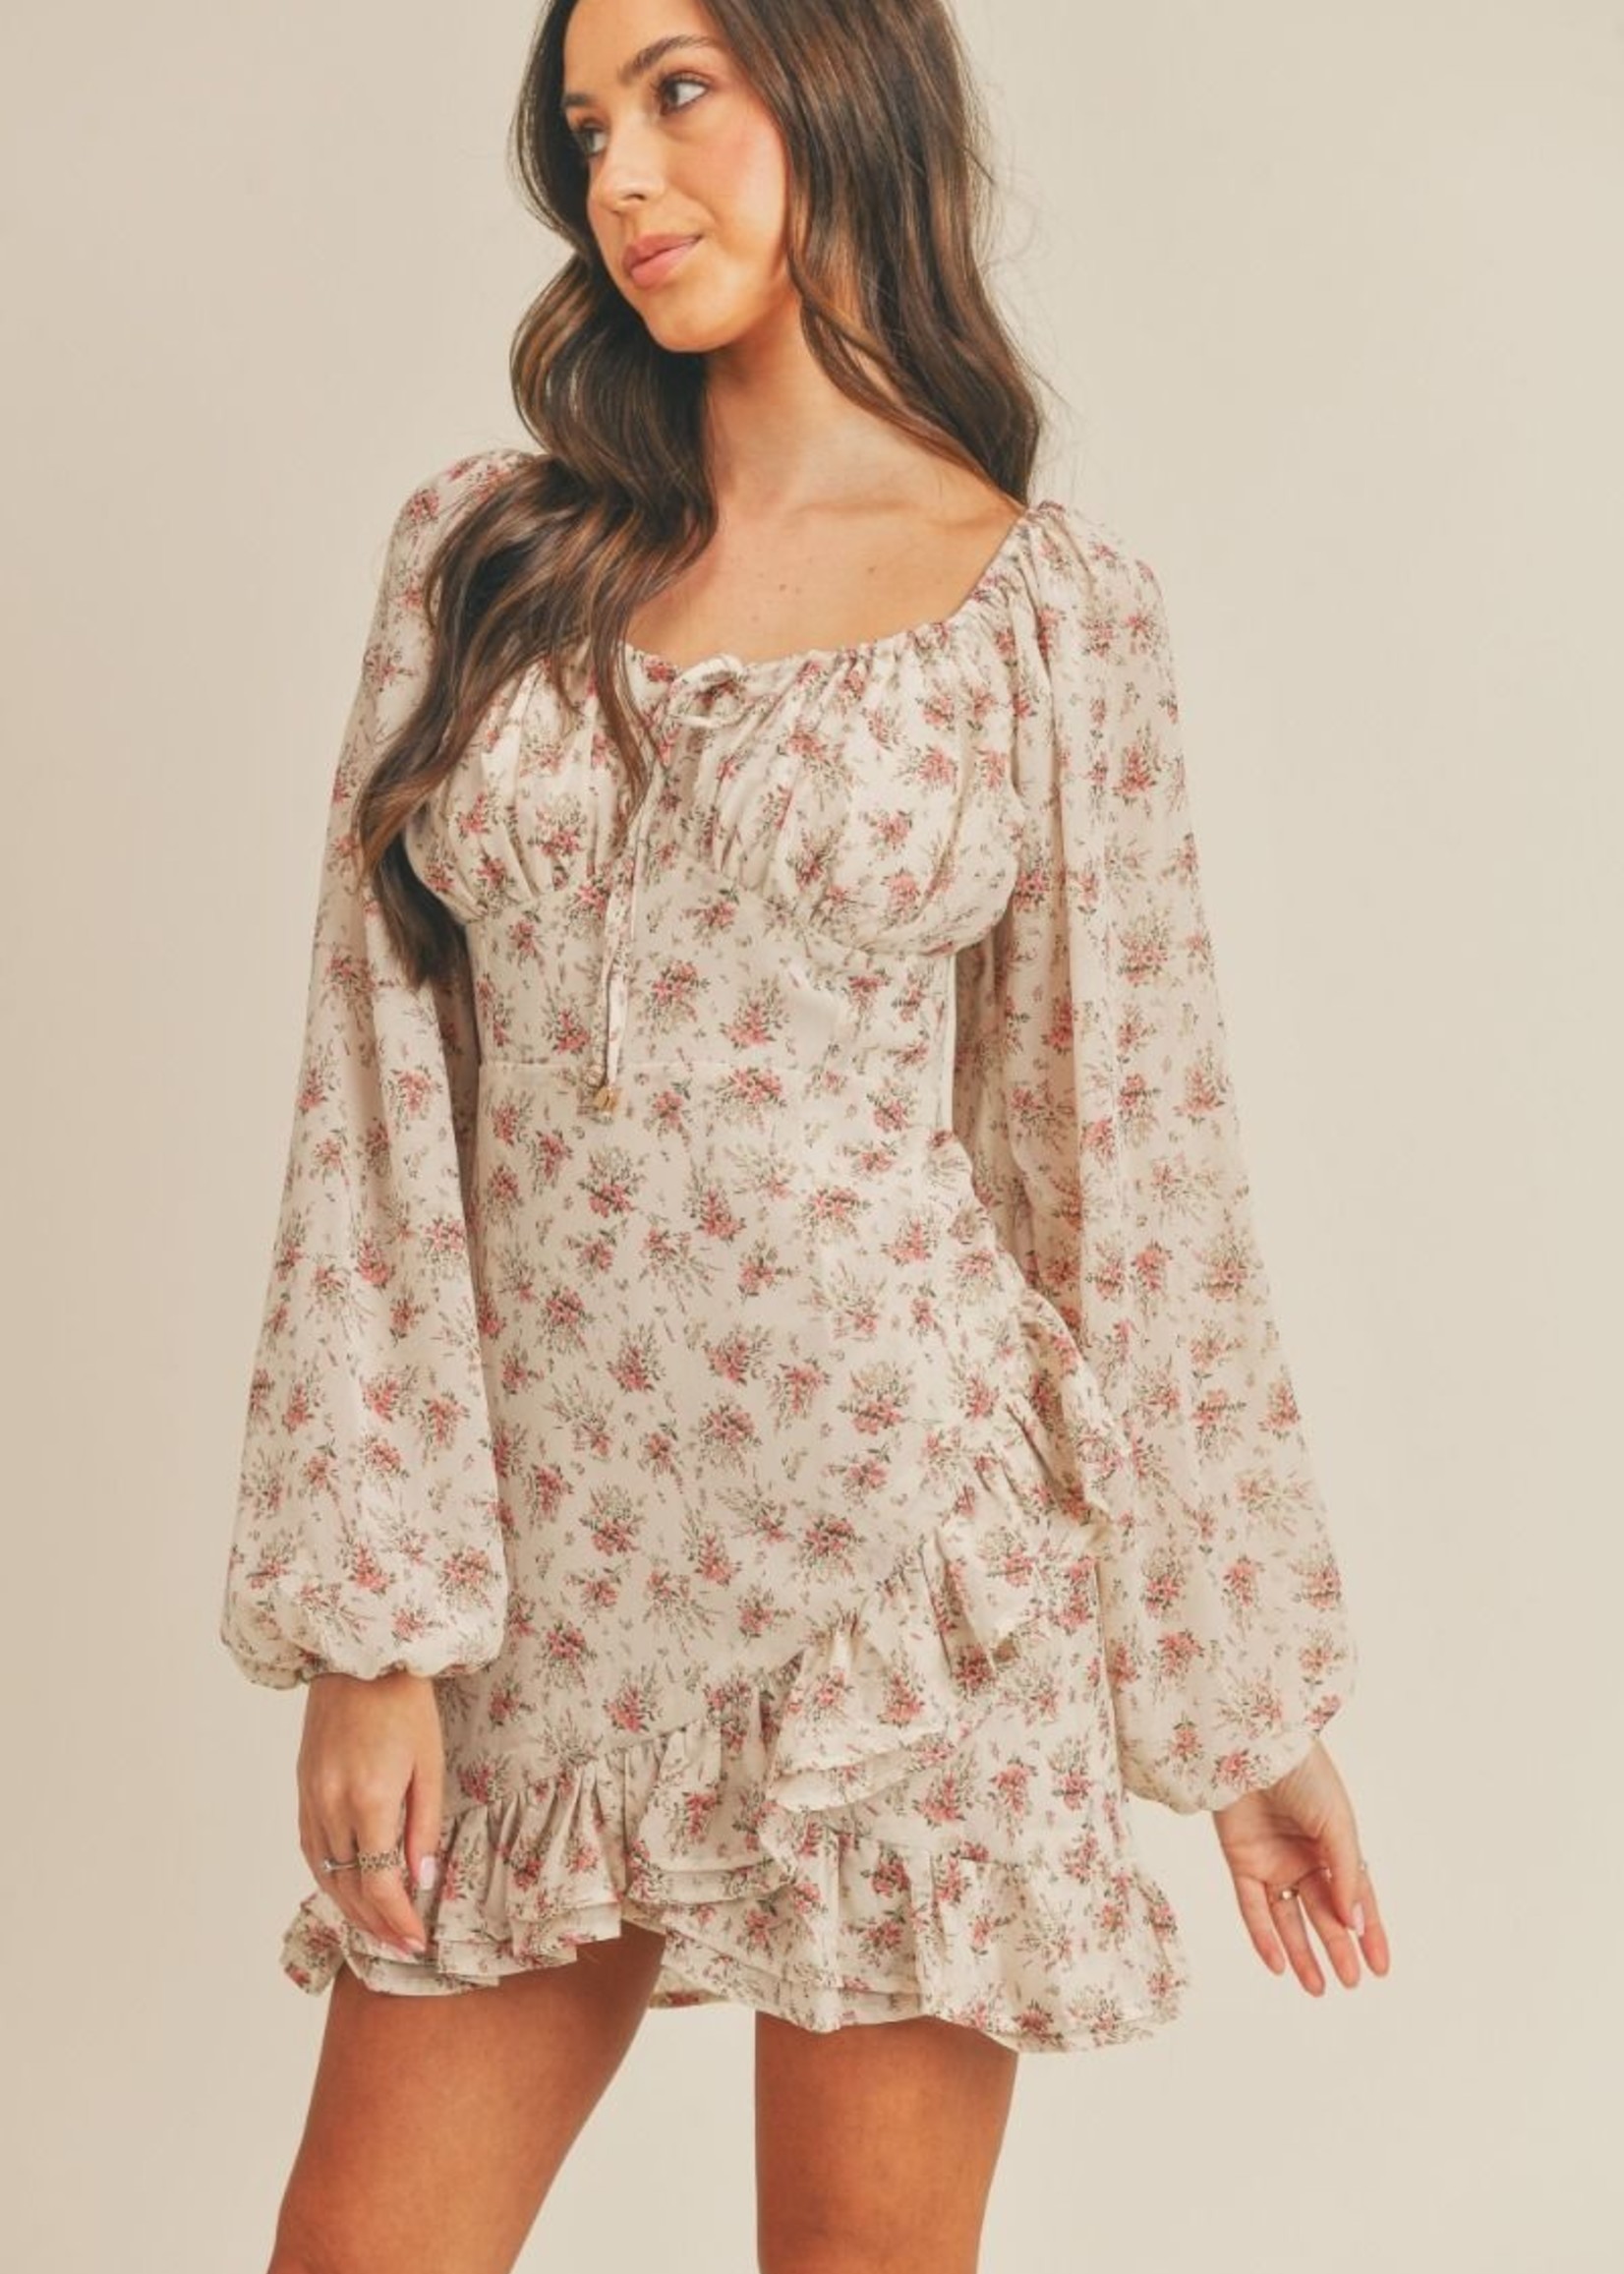 Lovers Floral Dress